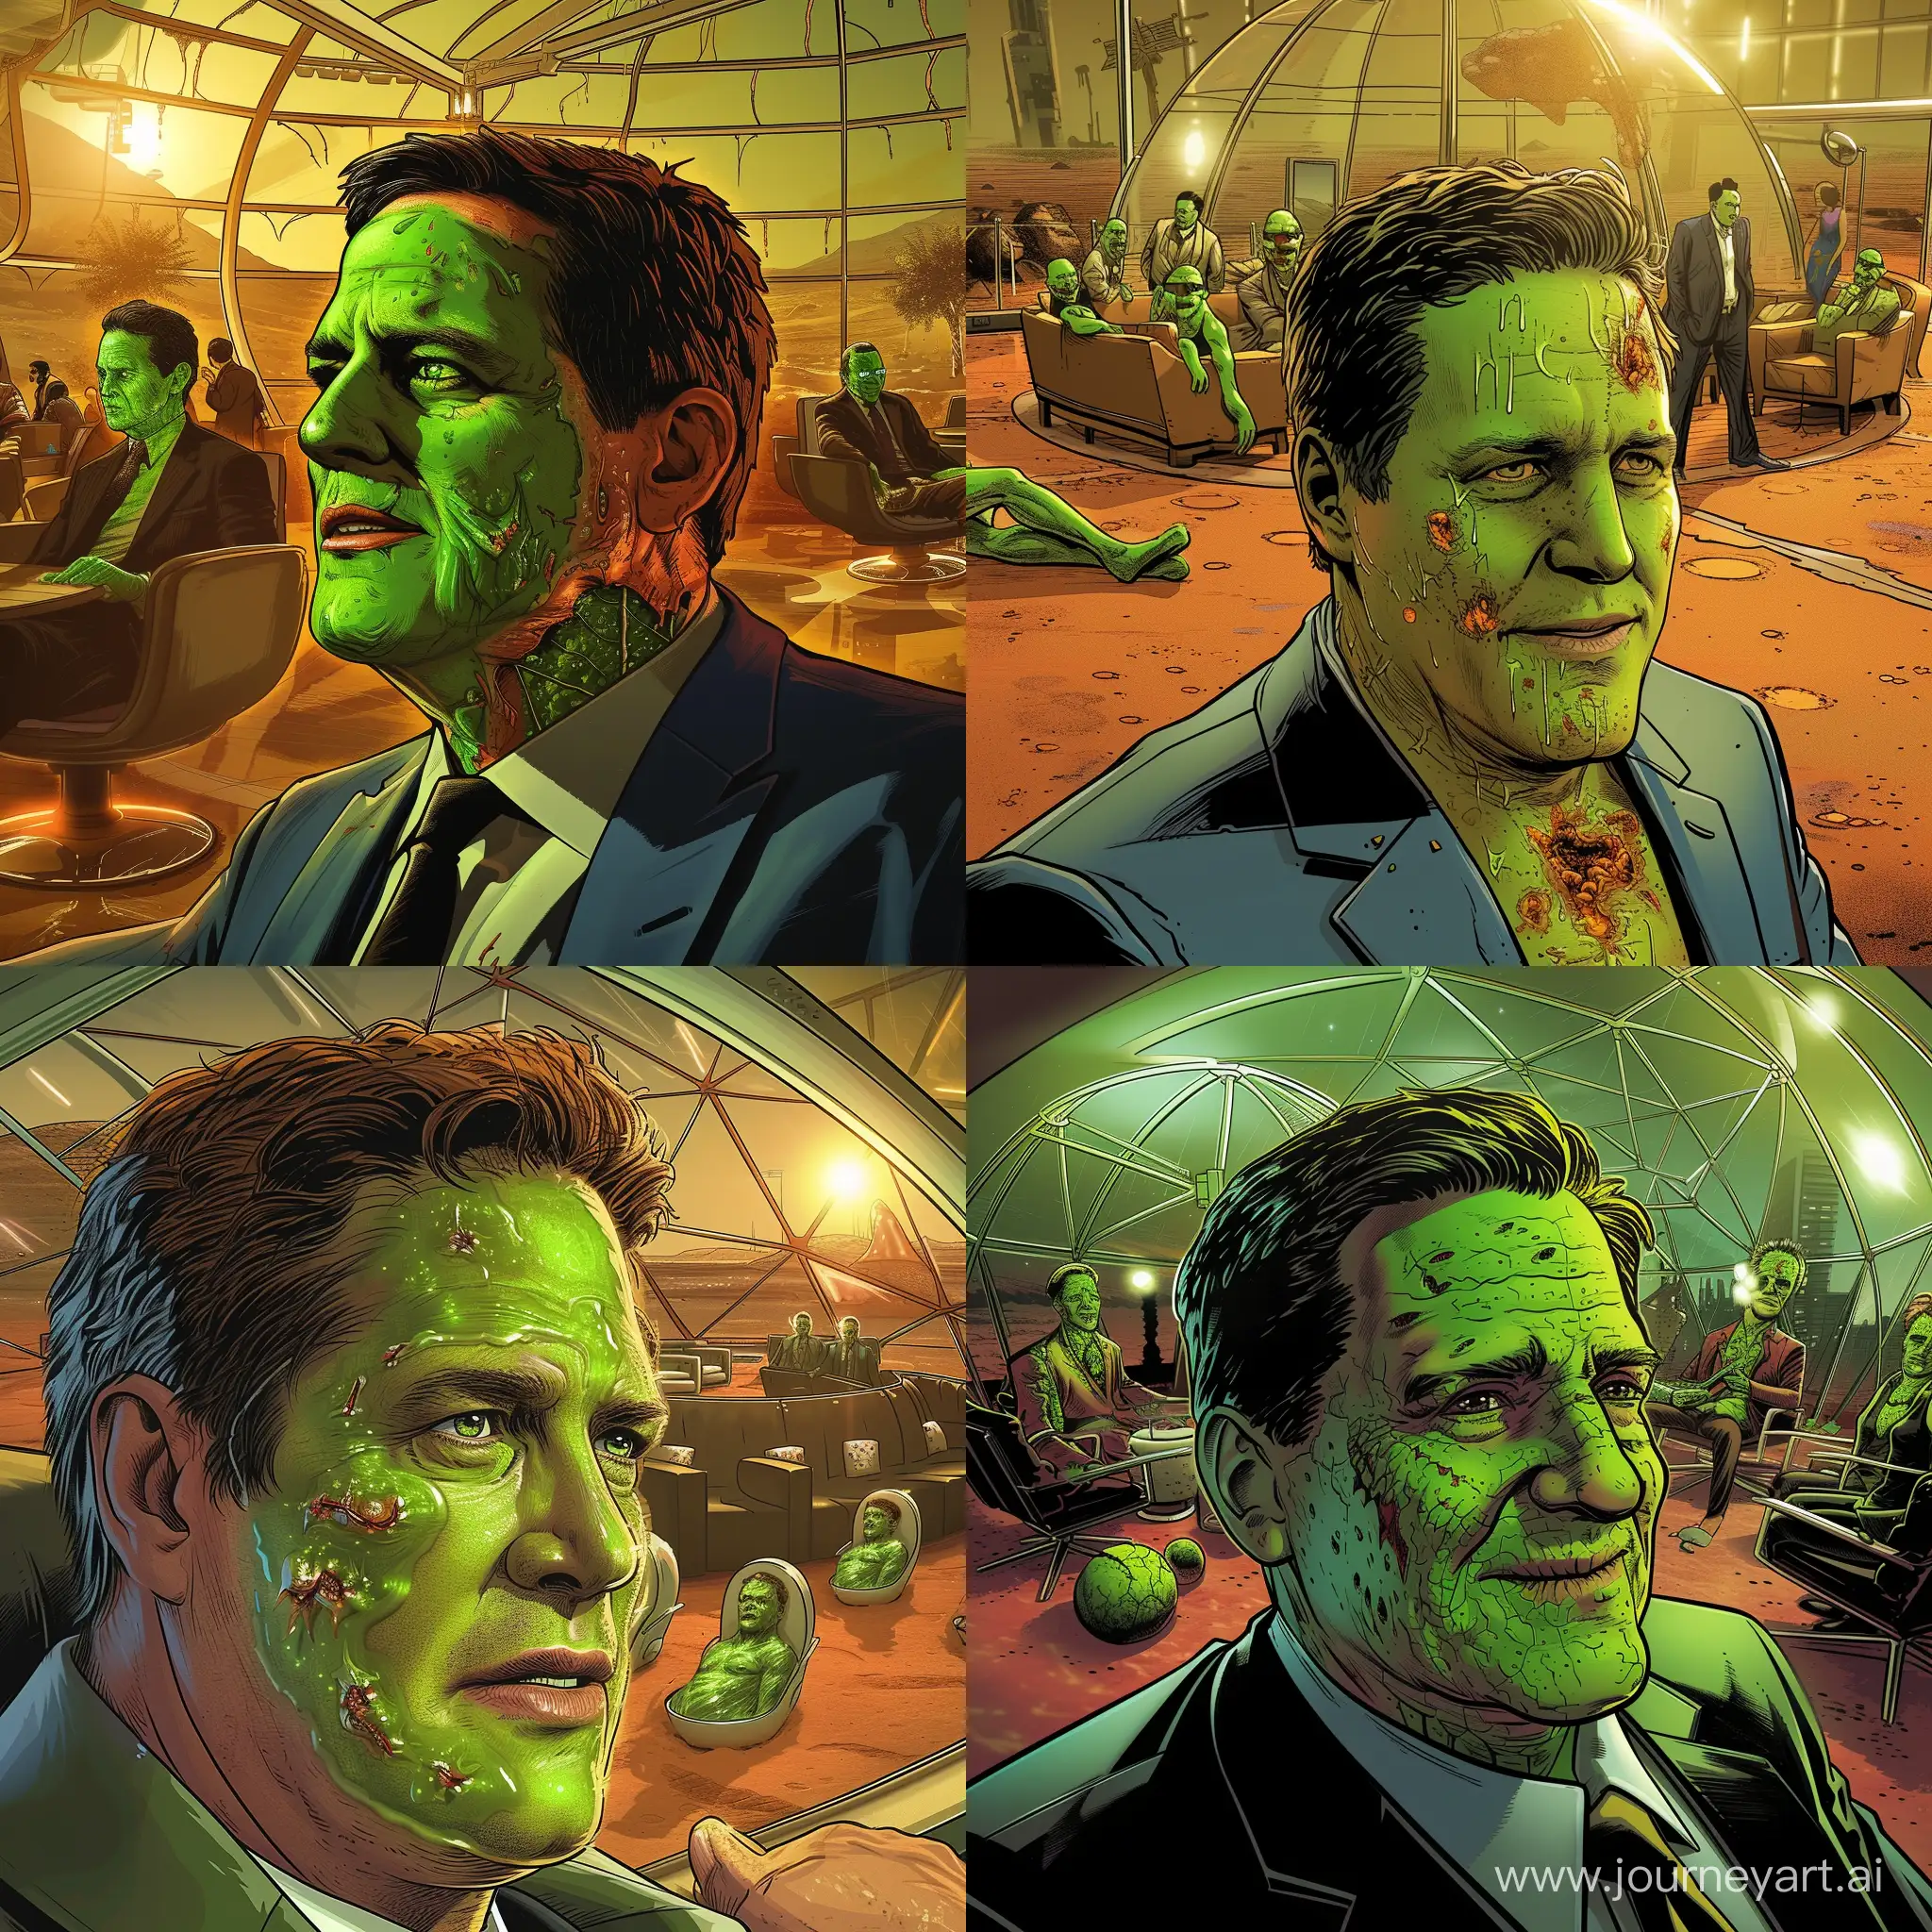 Sci-fi comic book style. Sickly Mark Cuban  with bright green skin. Inside an executive lounge in a glass dome on mars. Other billionaires with green skin in the background.